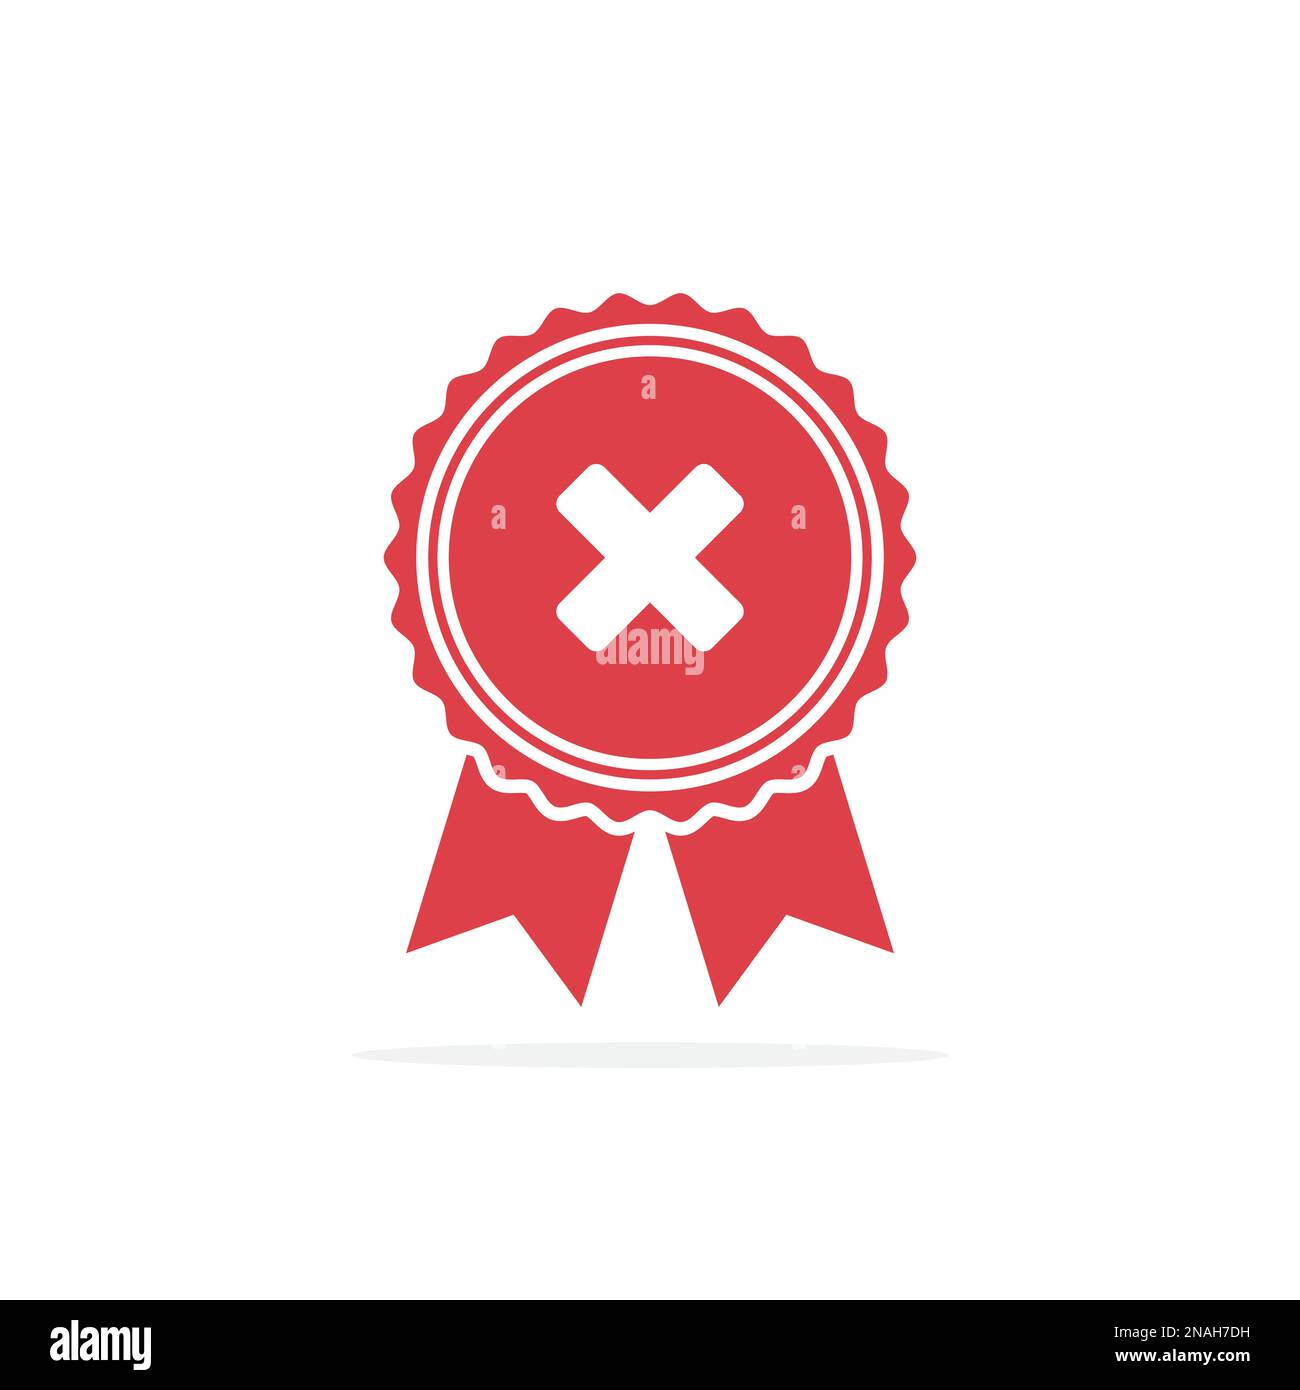 Red rejected or certified medal icon in a flat design with shadow Stock Vector